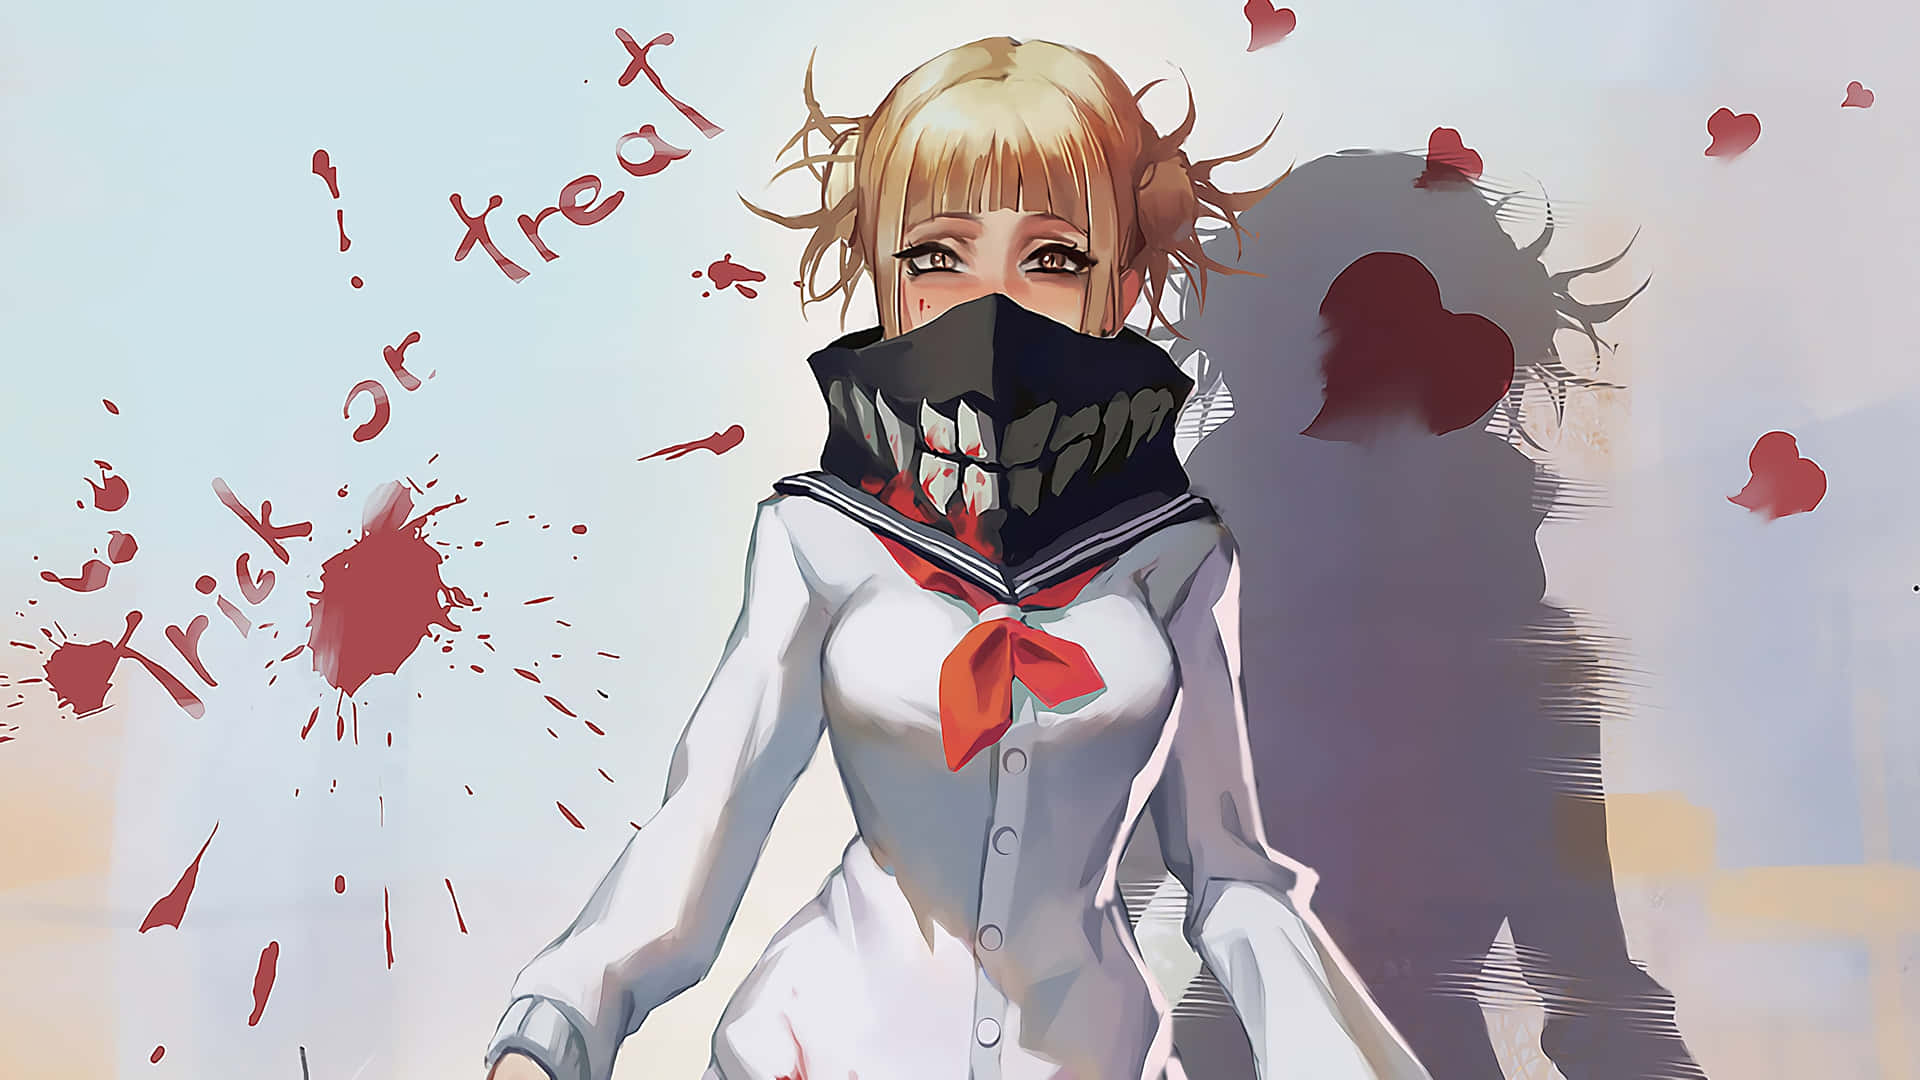 Follow Toga in her journey of becoming a hero in the world of My Hero Academia. Wallpaper